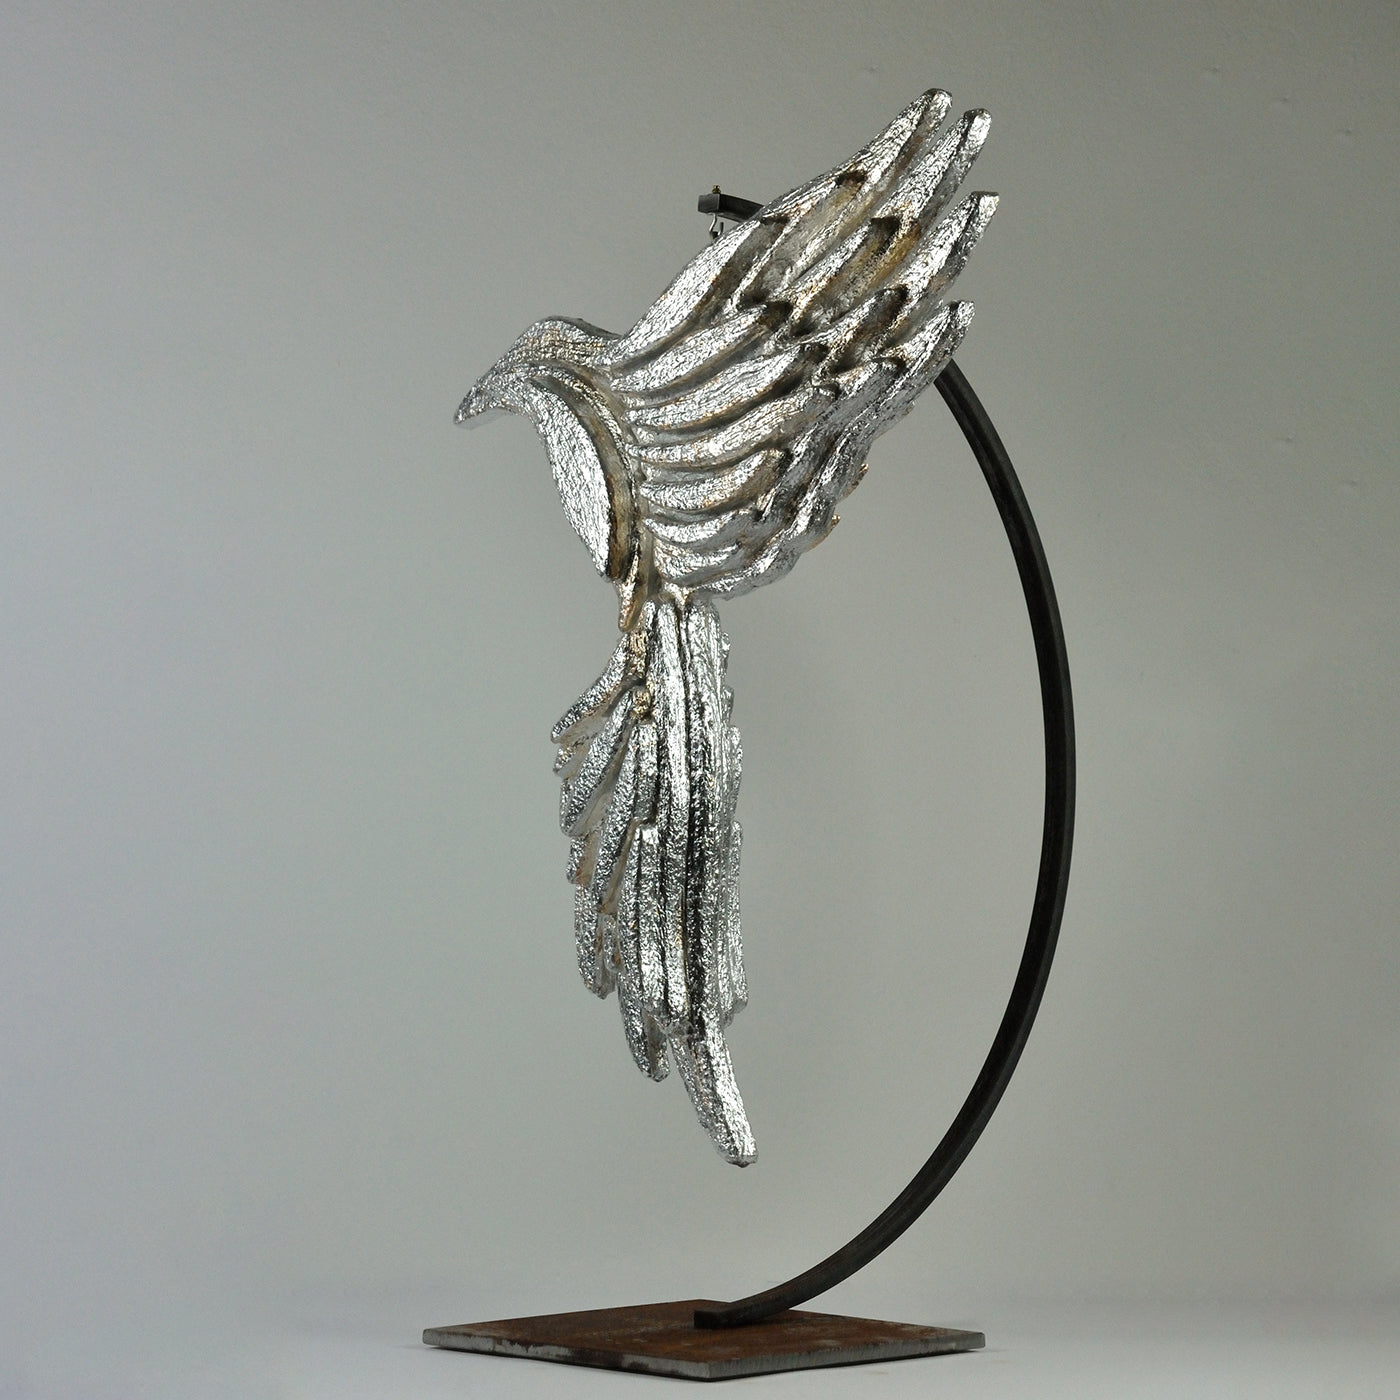 Fly Away Silvery Sculpture - Alternative view 1